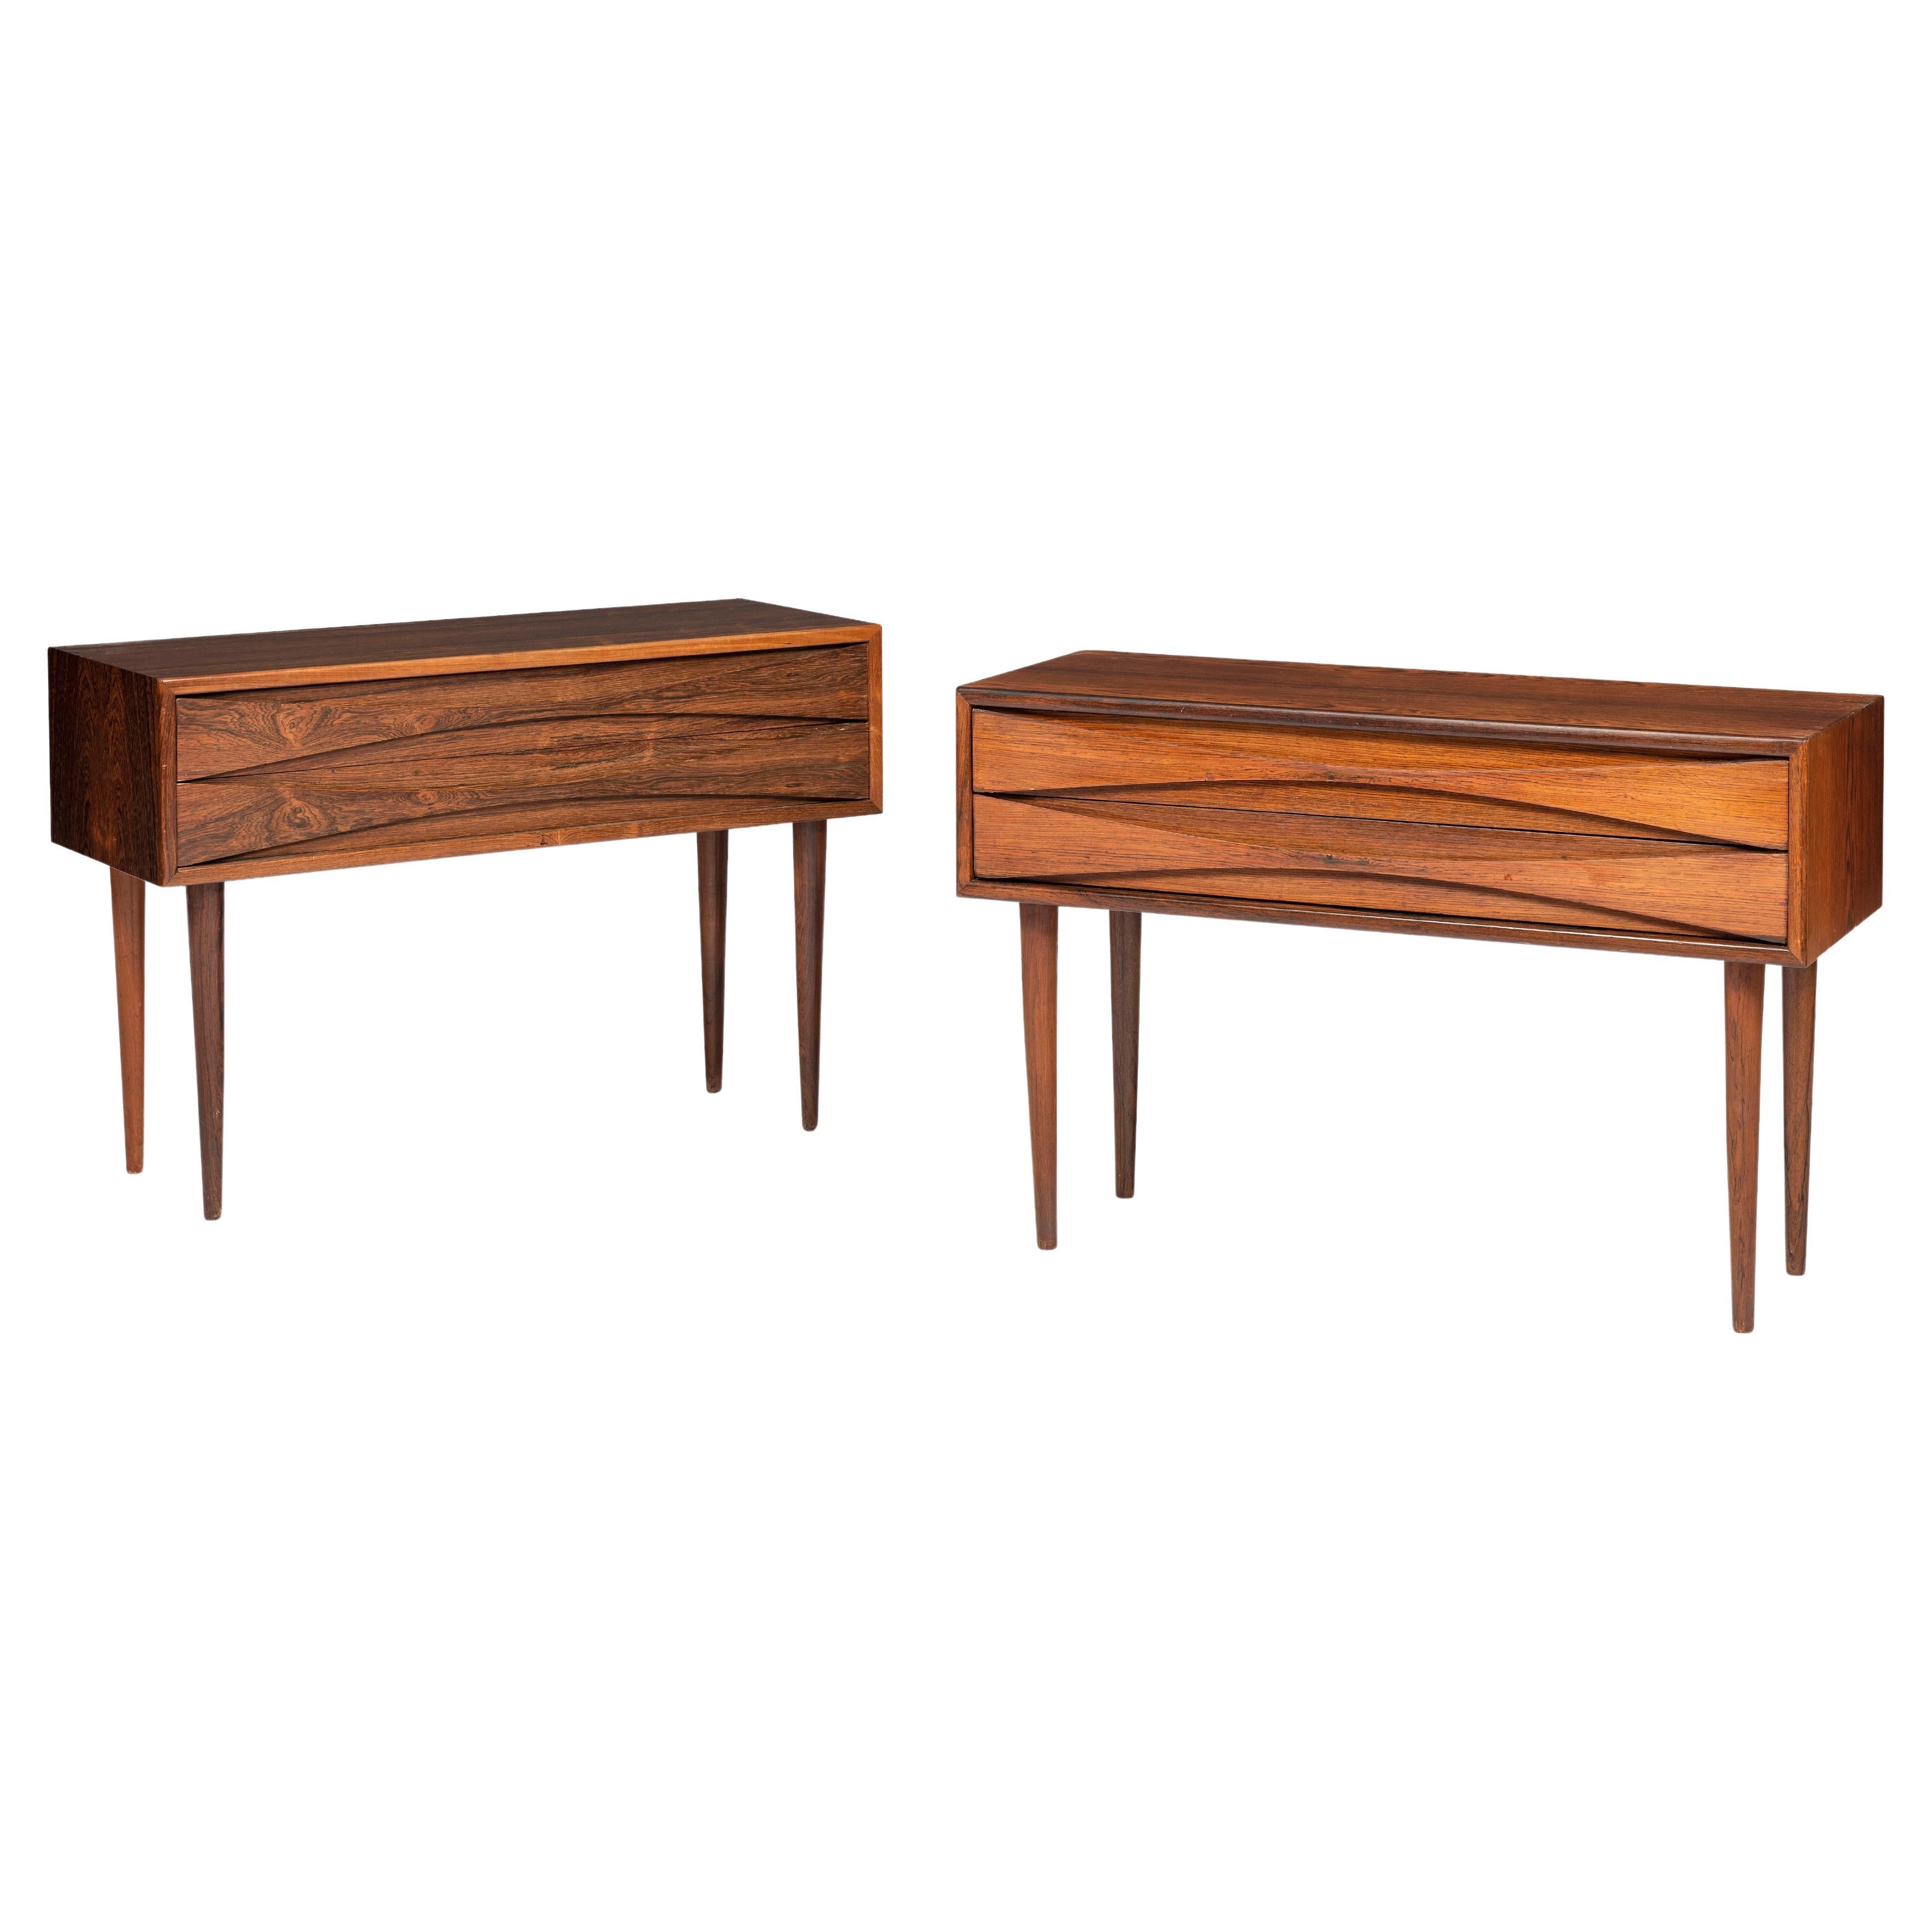 Pair of Swedish Modern Rosewood Night Stands by Niels Clausen, 1960's For Sale